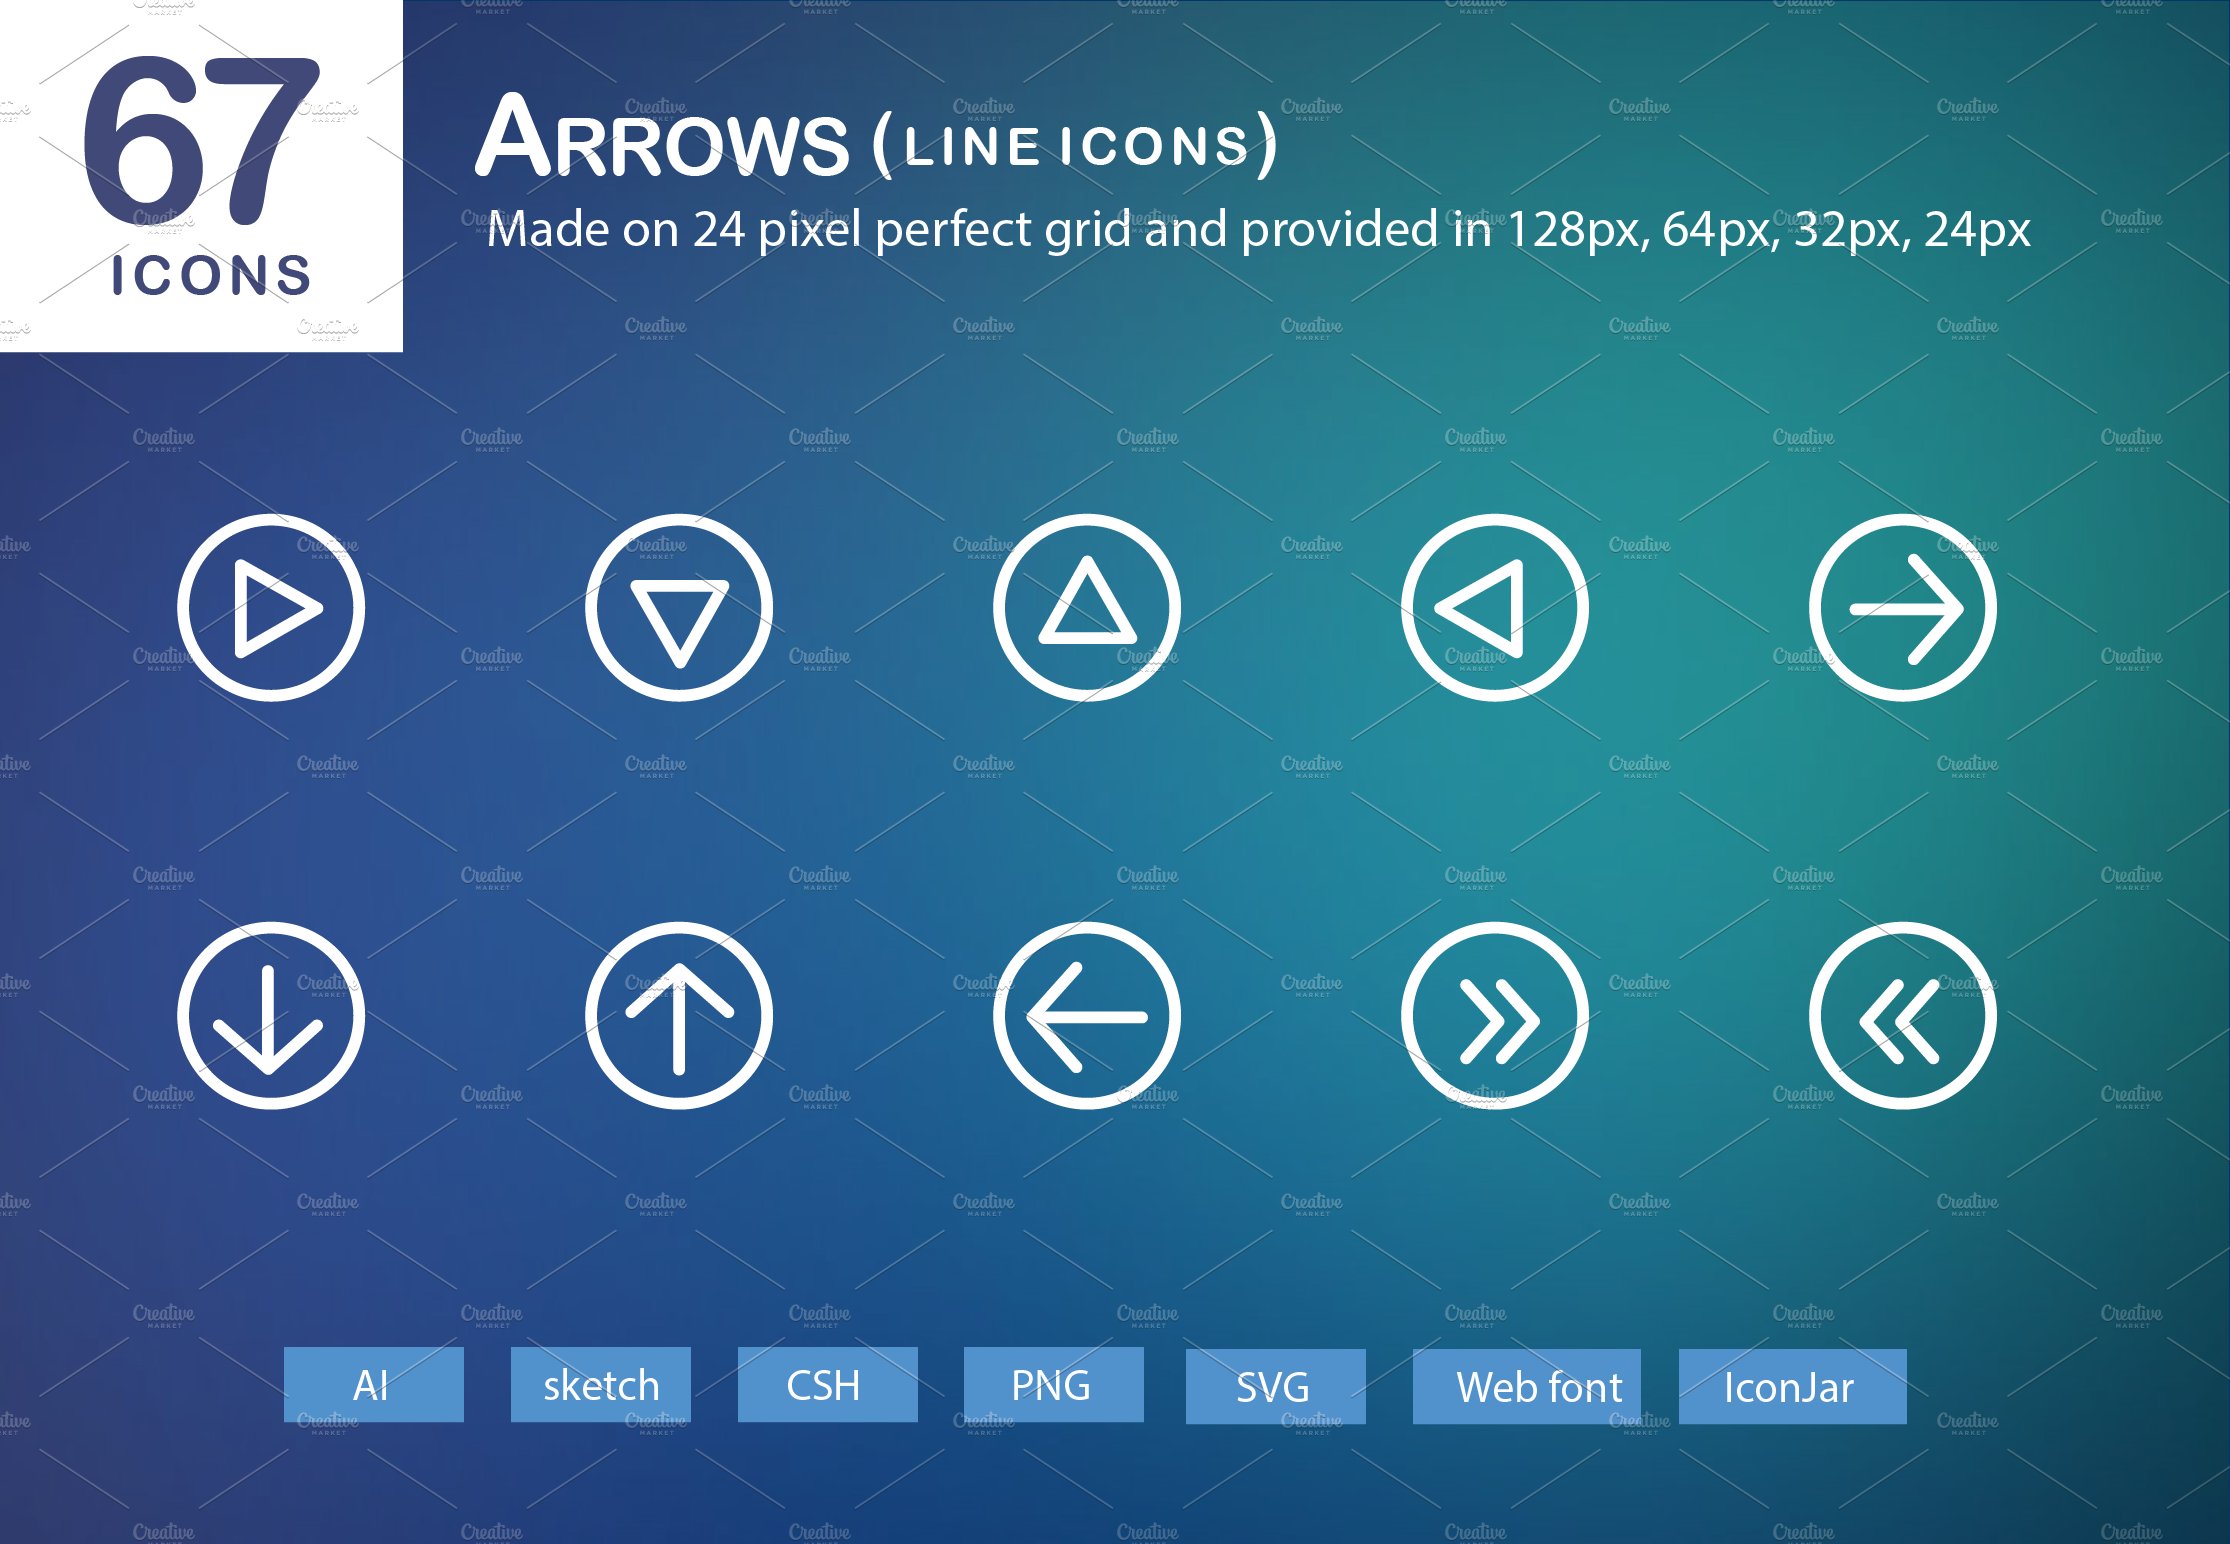 67 Arrows Line Icons cover image.